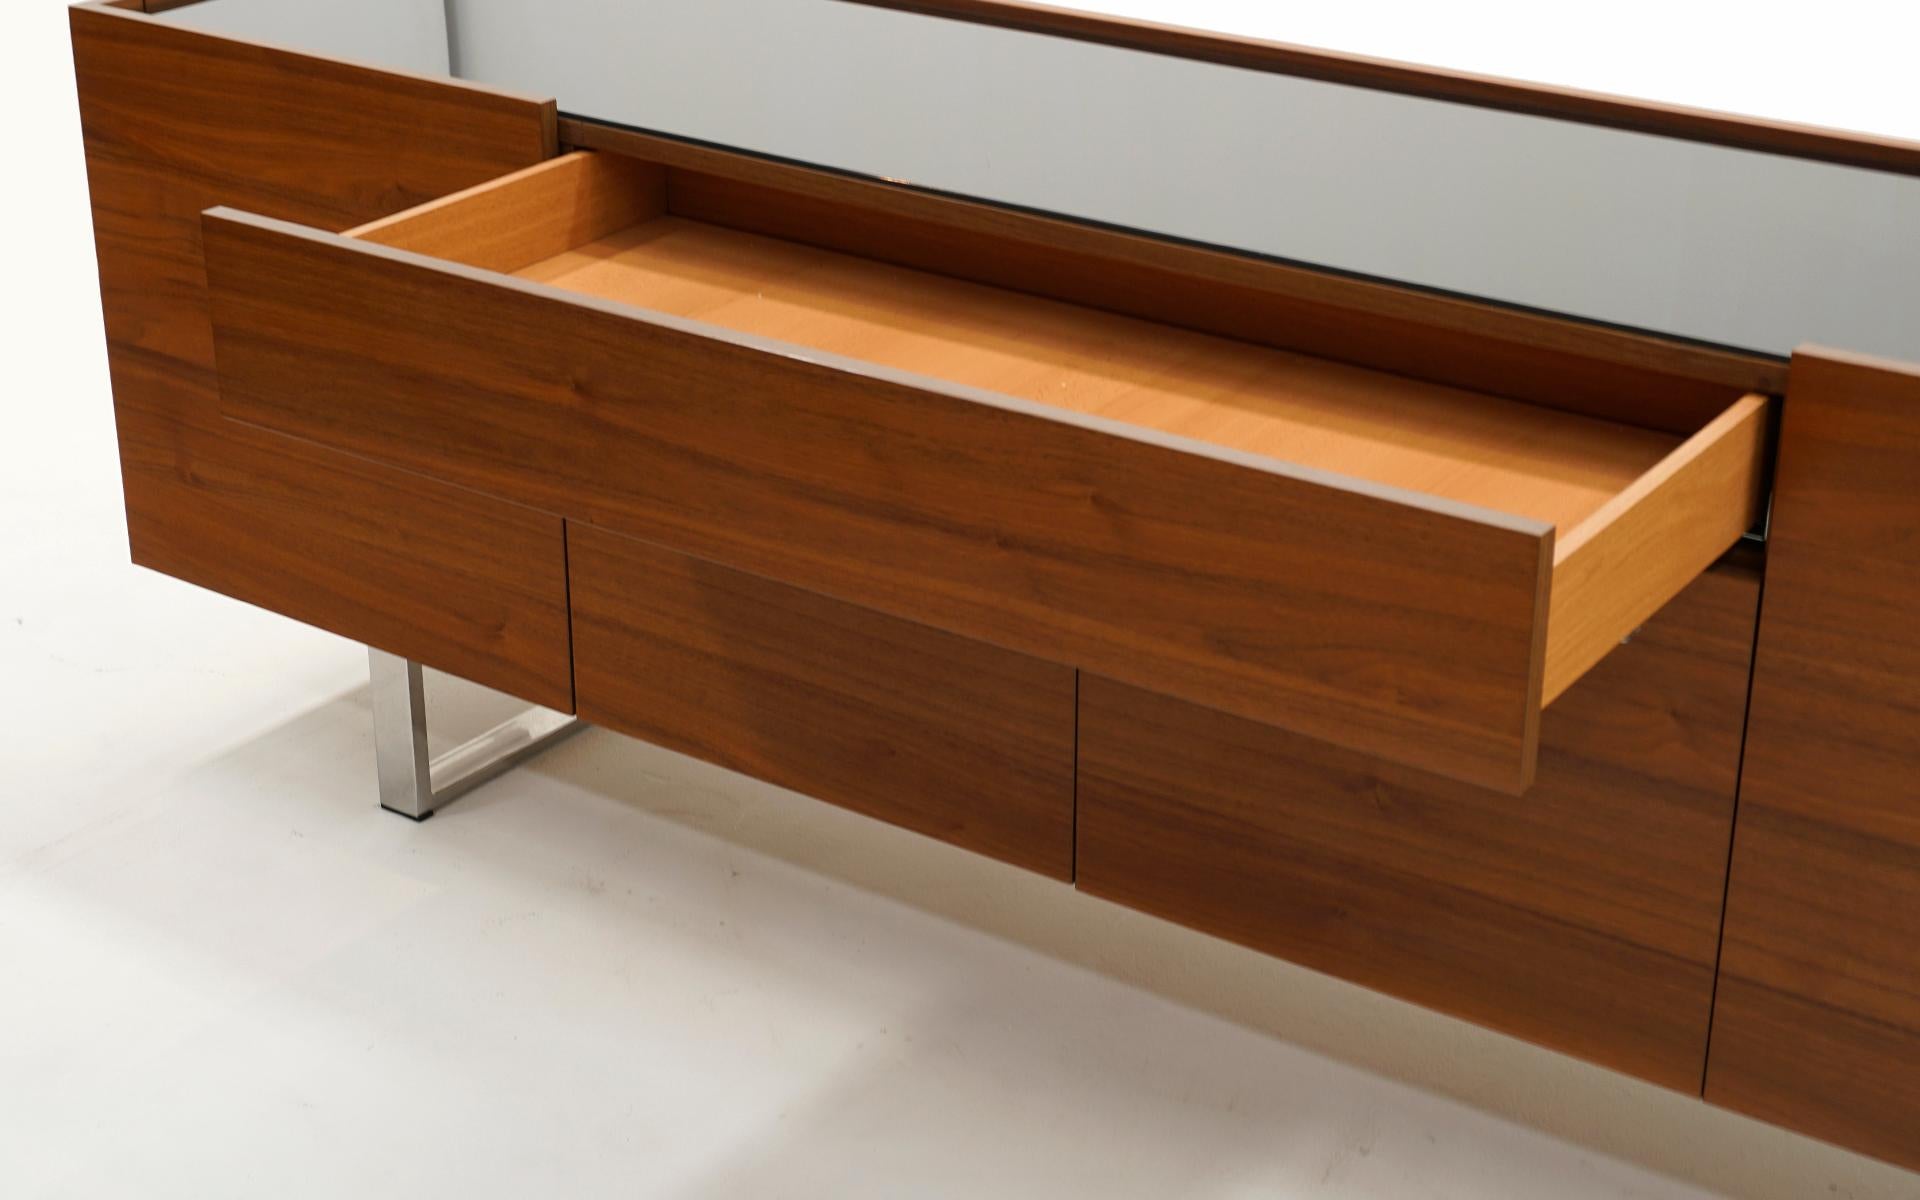 Walnut Credenza w/ Black Glass Top, Chrome Sled Base by Calligaris, Italy, 2010 For Sale 1